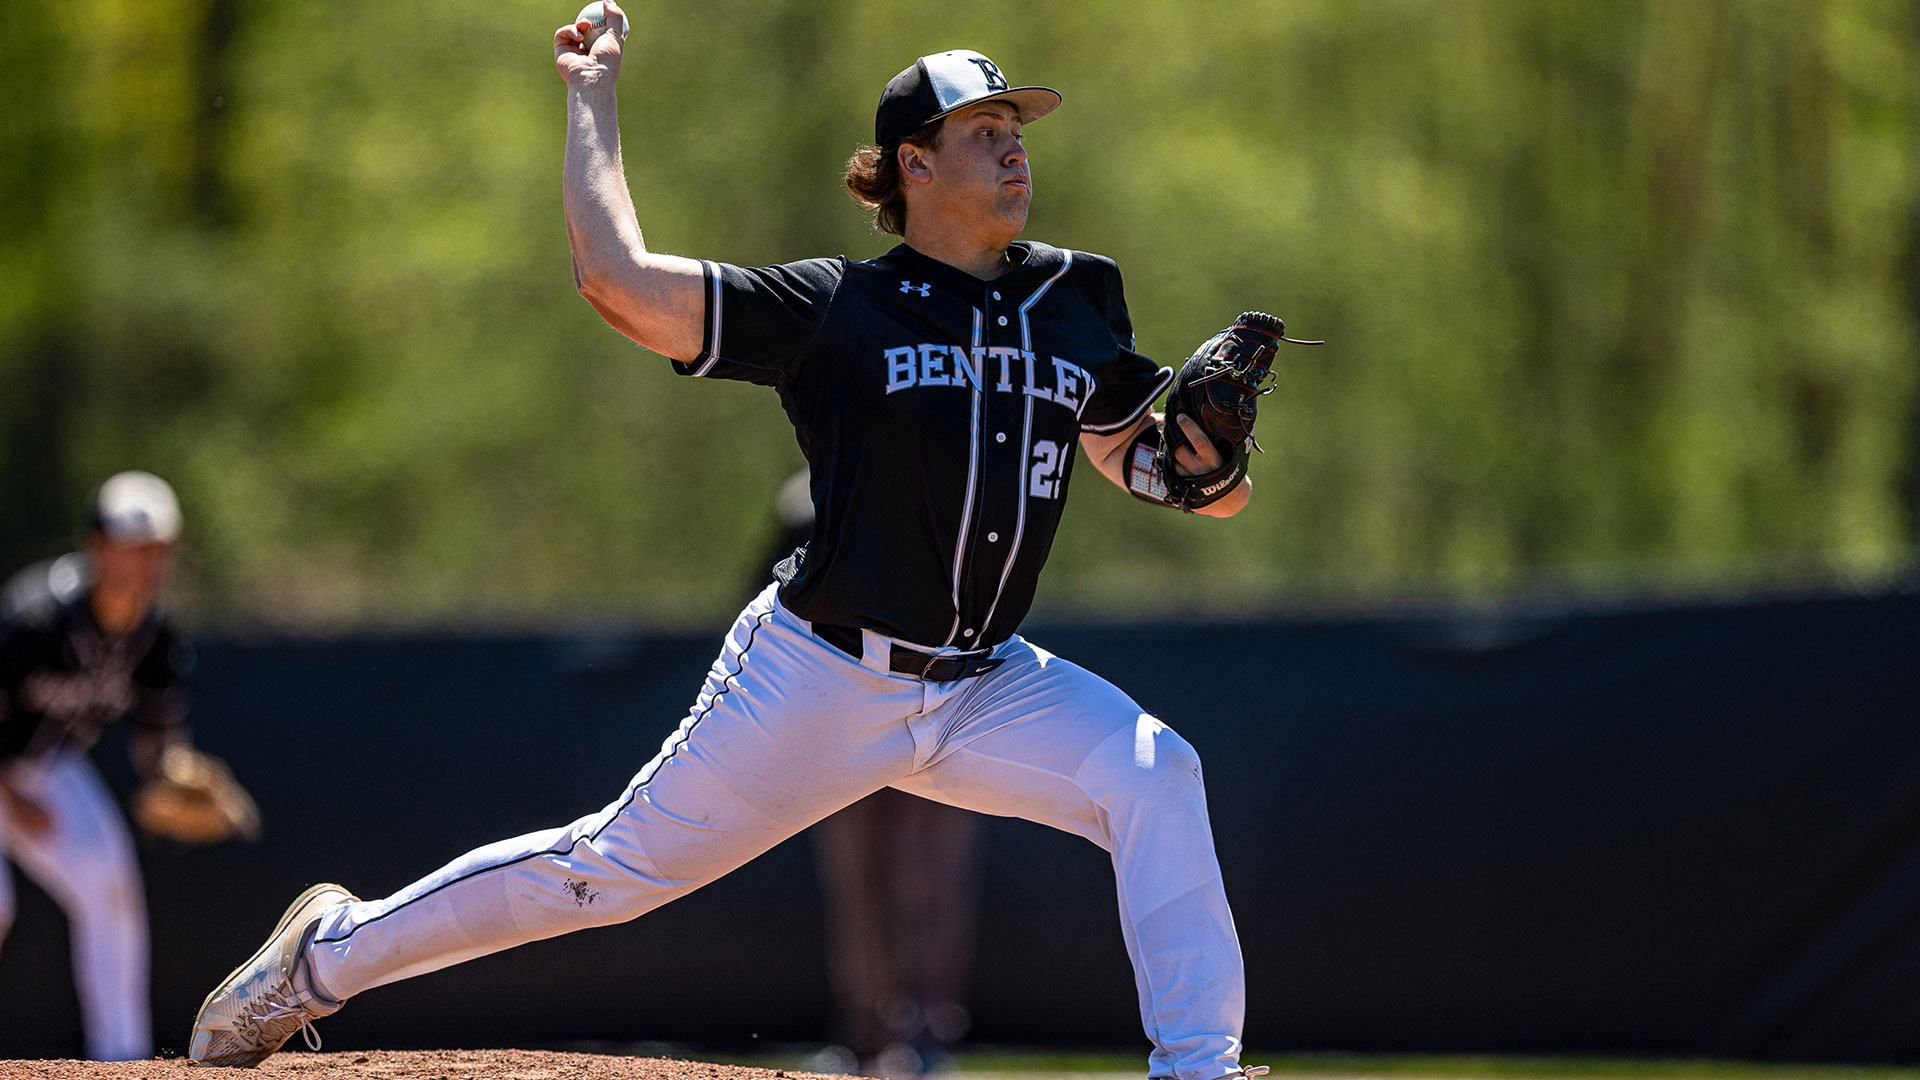 Glupe throws seven shutout innings, Rizzuto homers to beat Saint Anselm